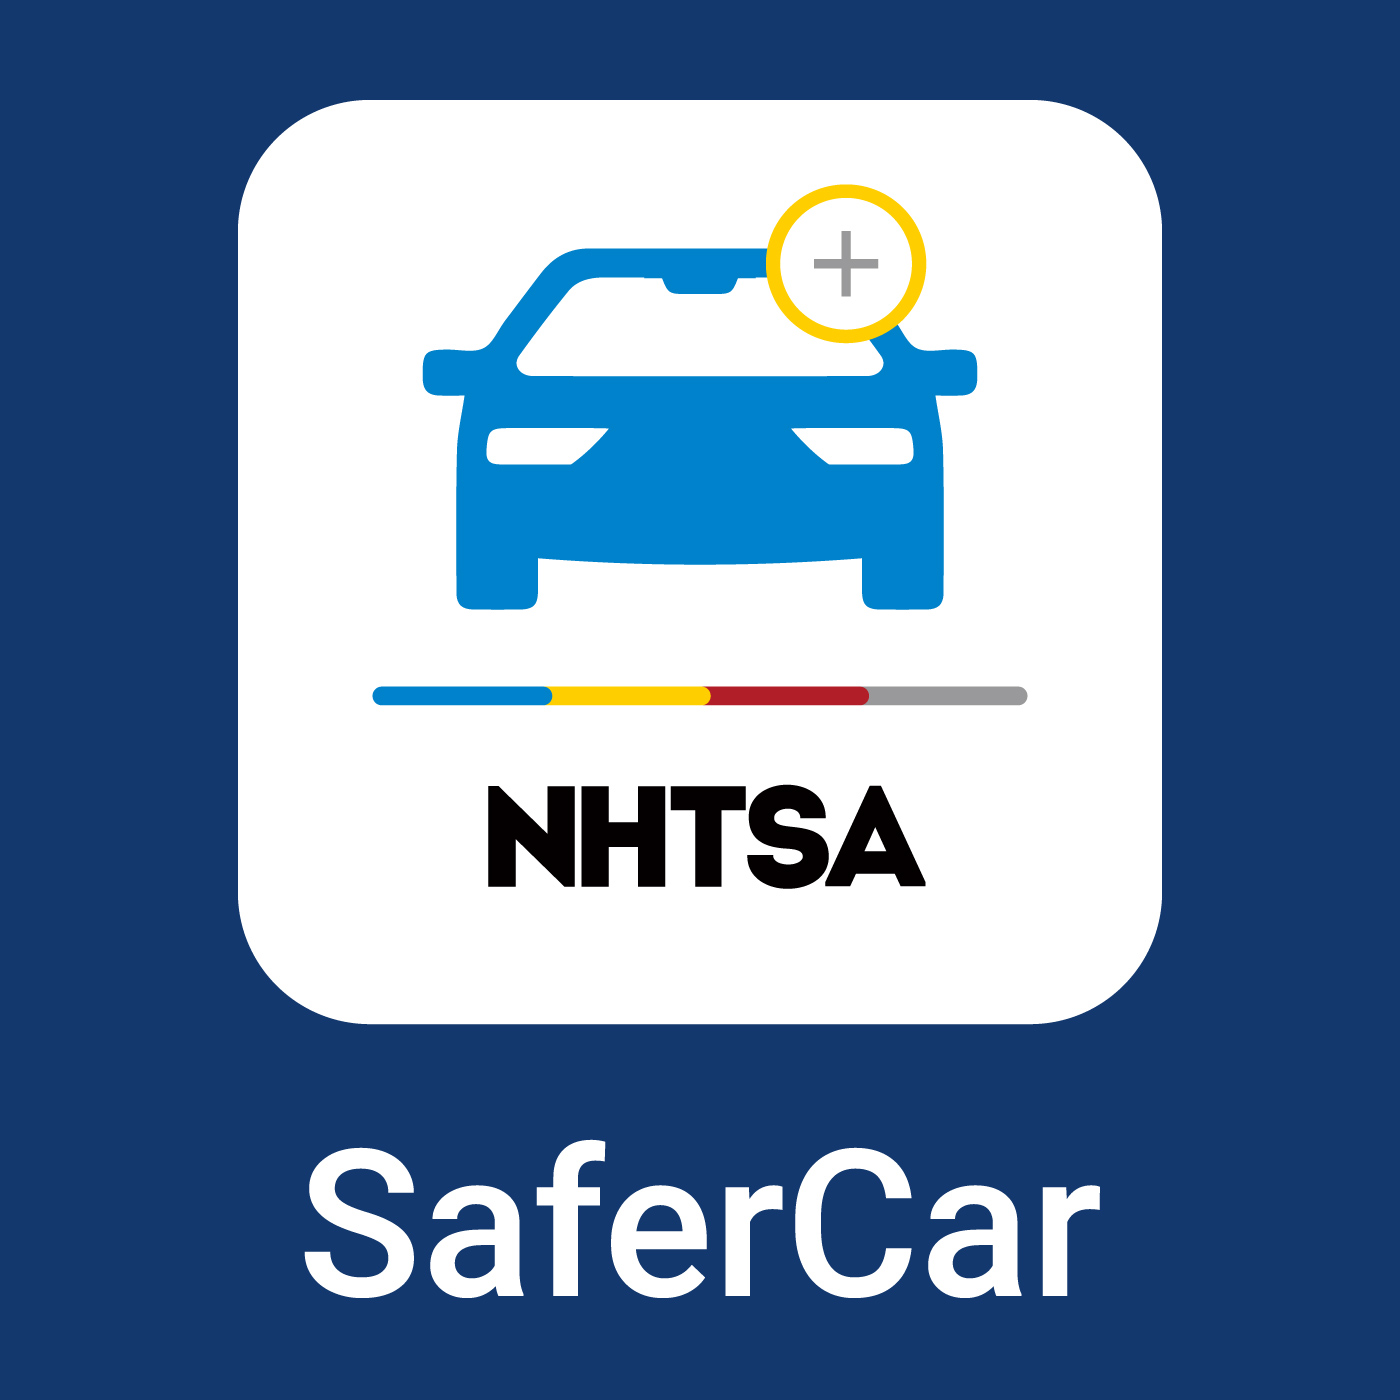 safety travel by car